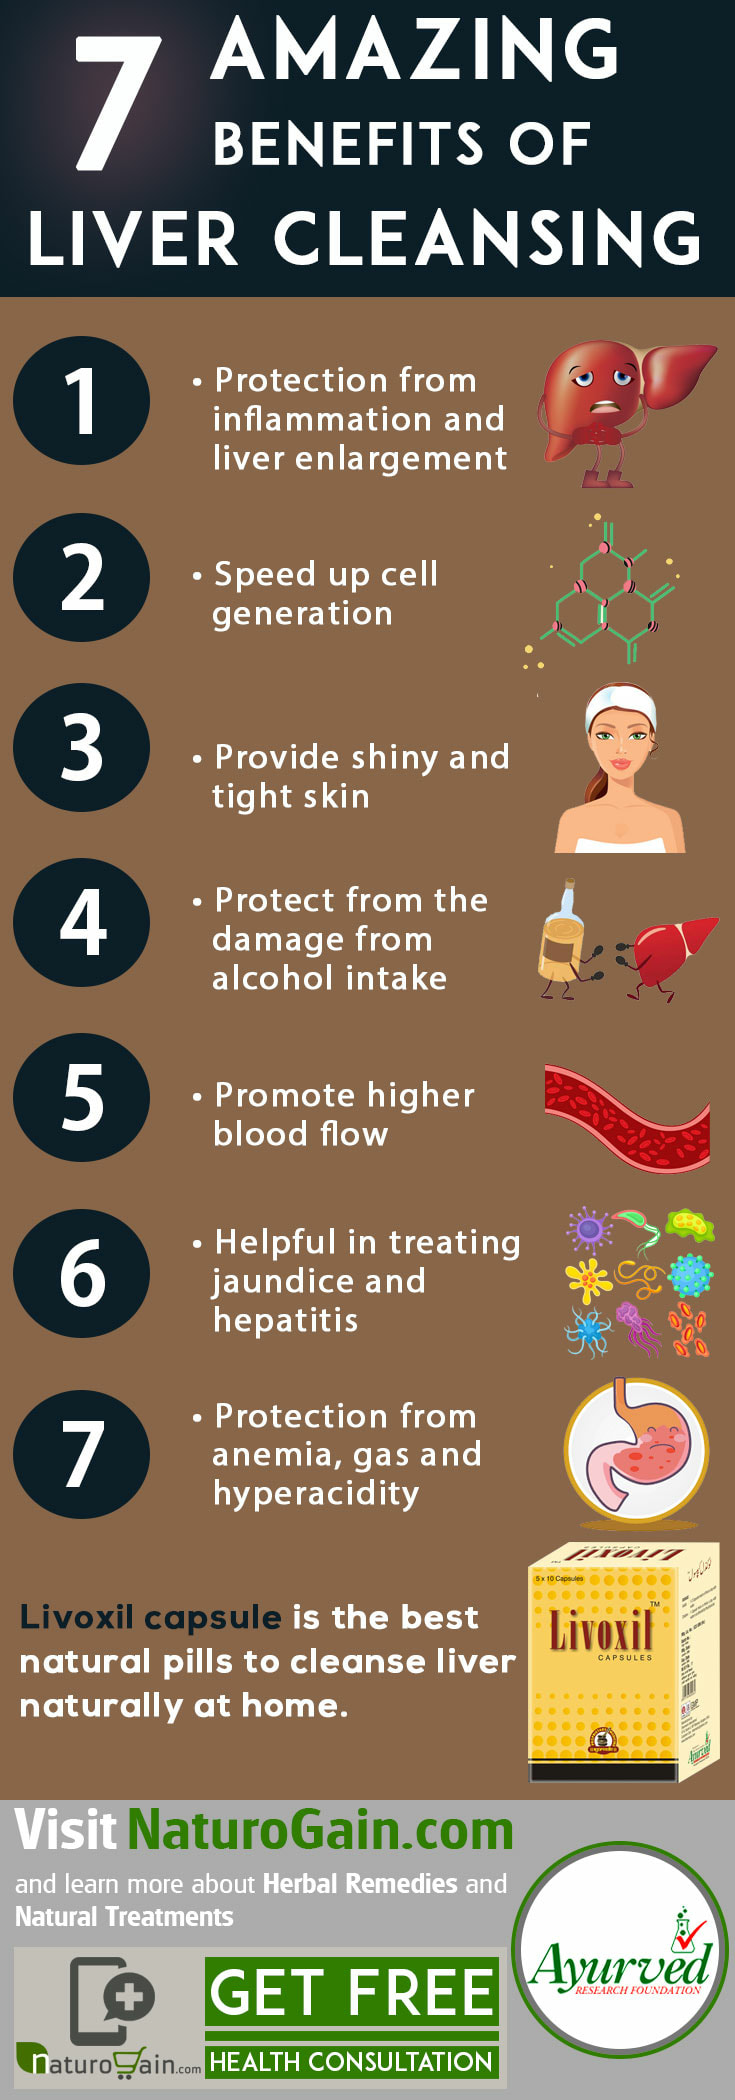 amazing benefits of liver cleansing info-graphic